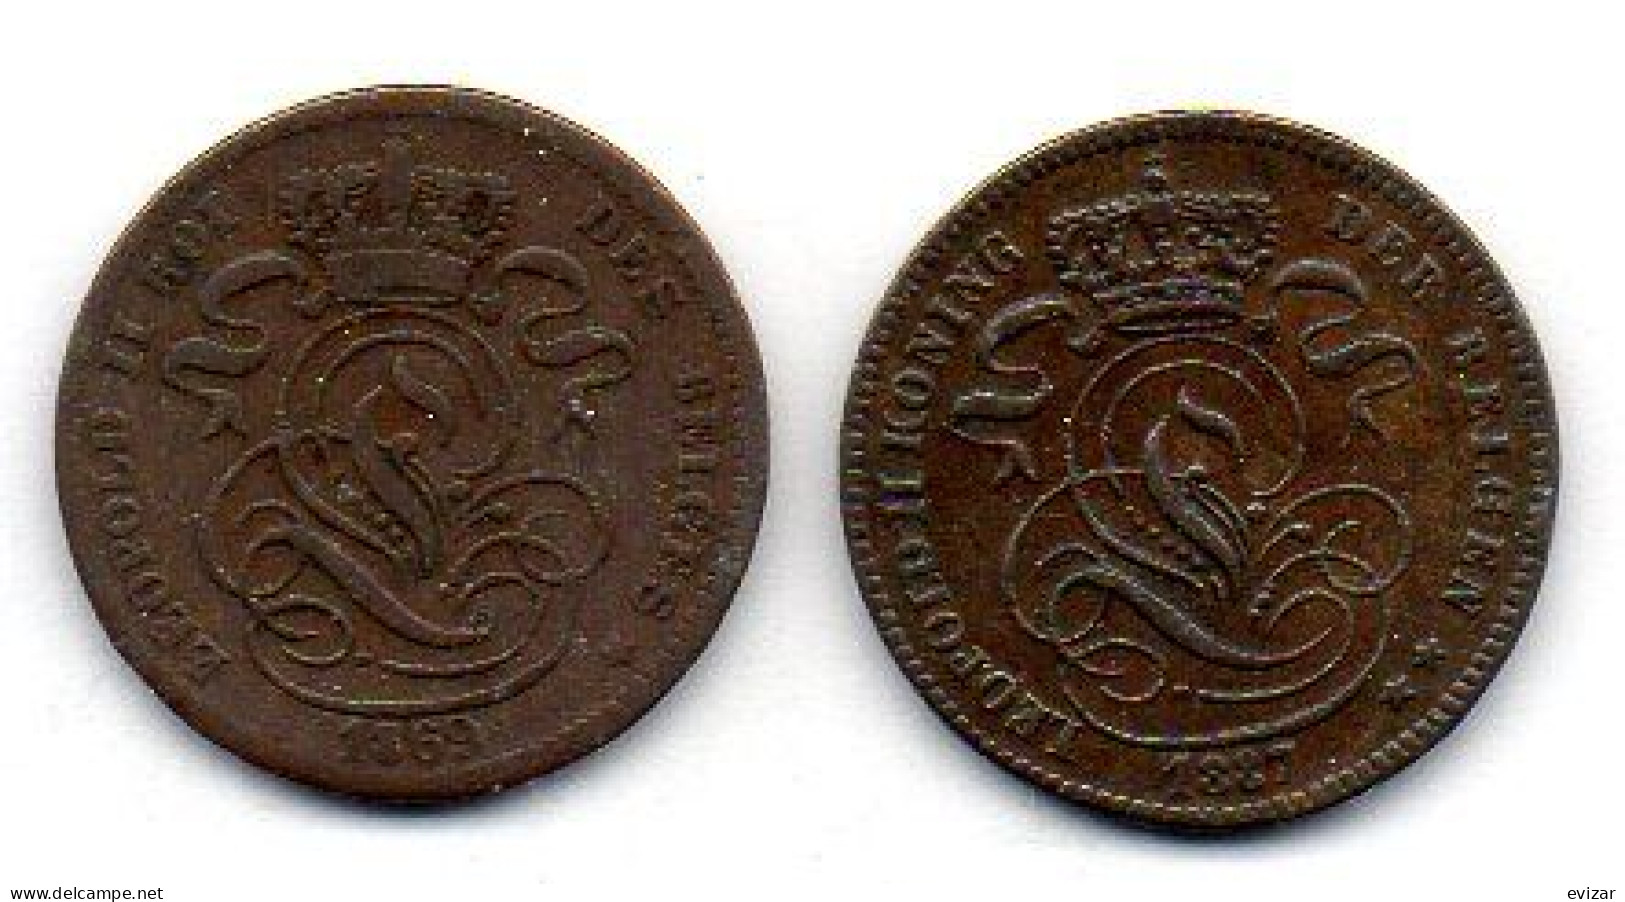 BELGIUM - Set Of Two Coins 2 Centimes, Copper, Year 1835, KM # 4.1, 4.2, Wide & Narrow Rims - 2 Cent